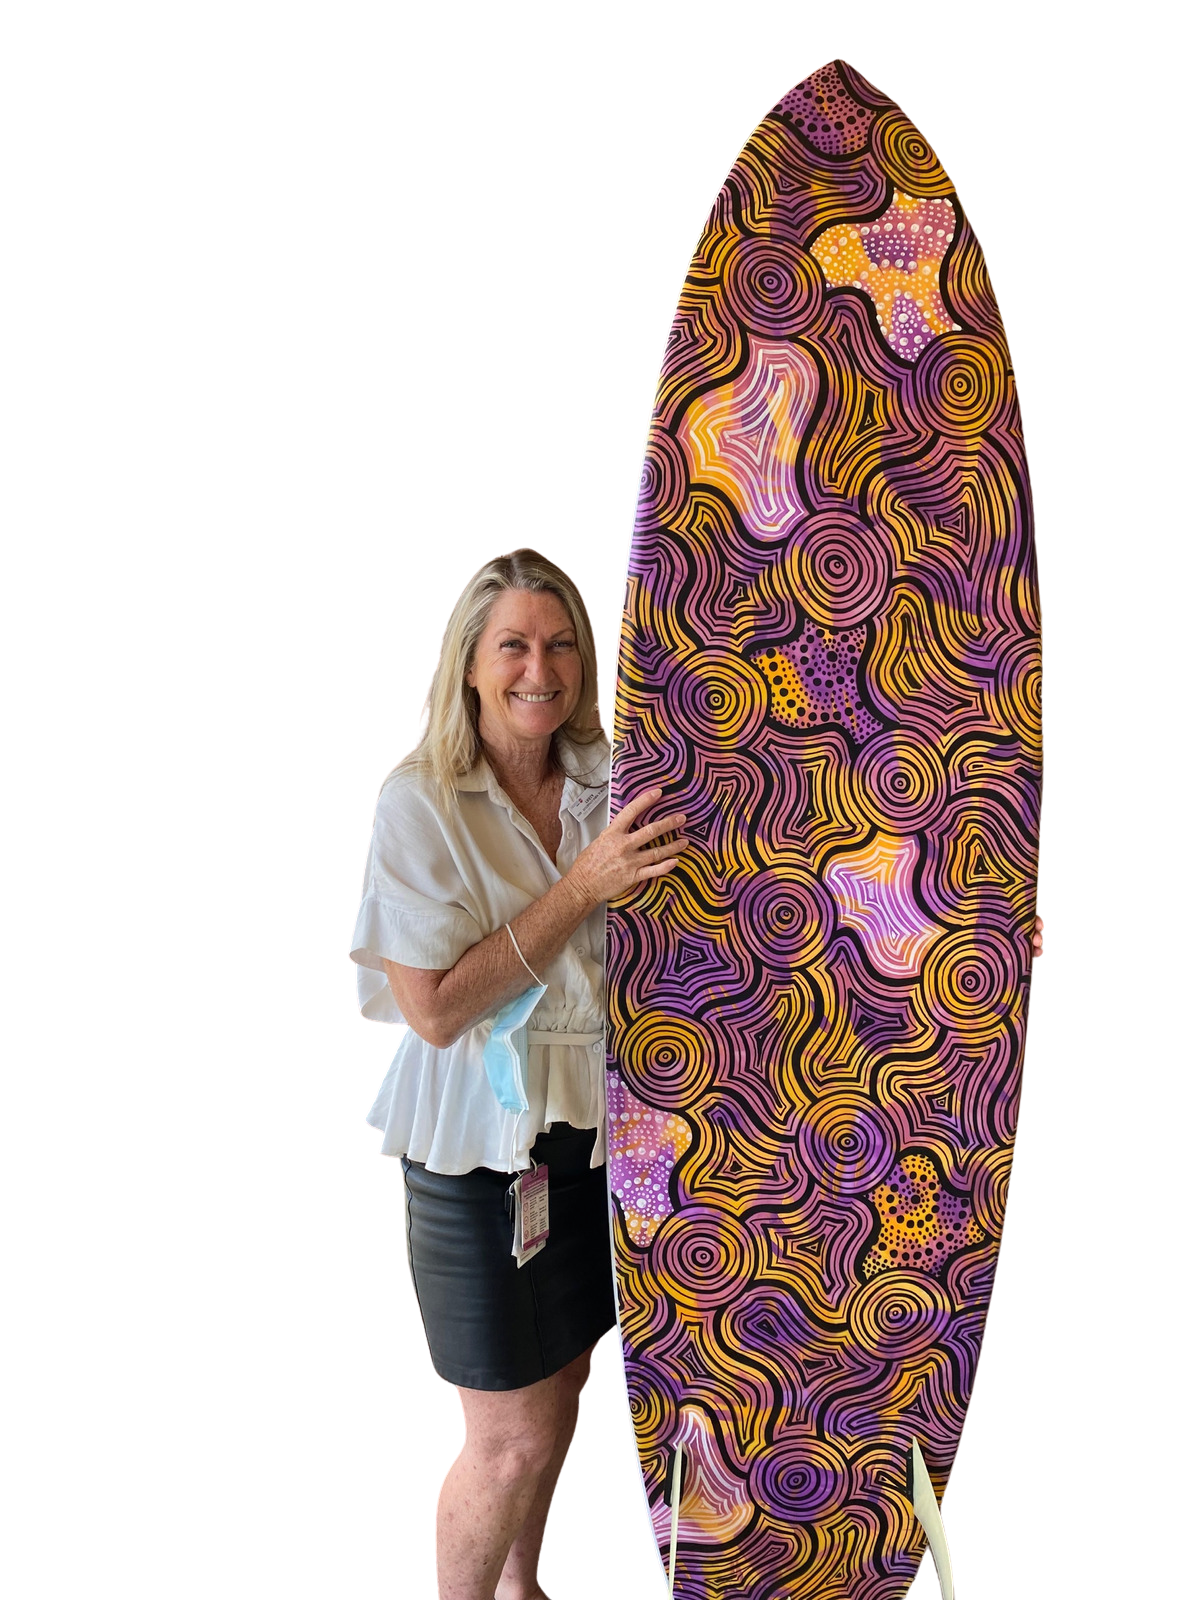 Kerry McMorrow 2022 board winner - Background Removed.png